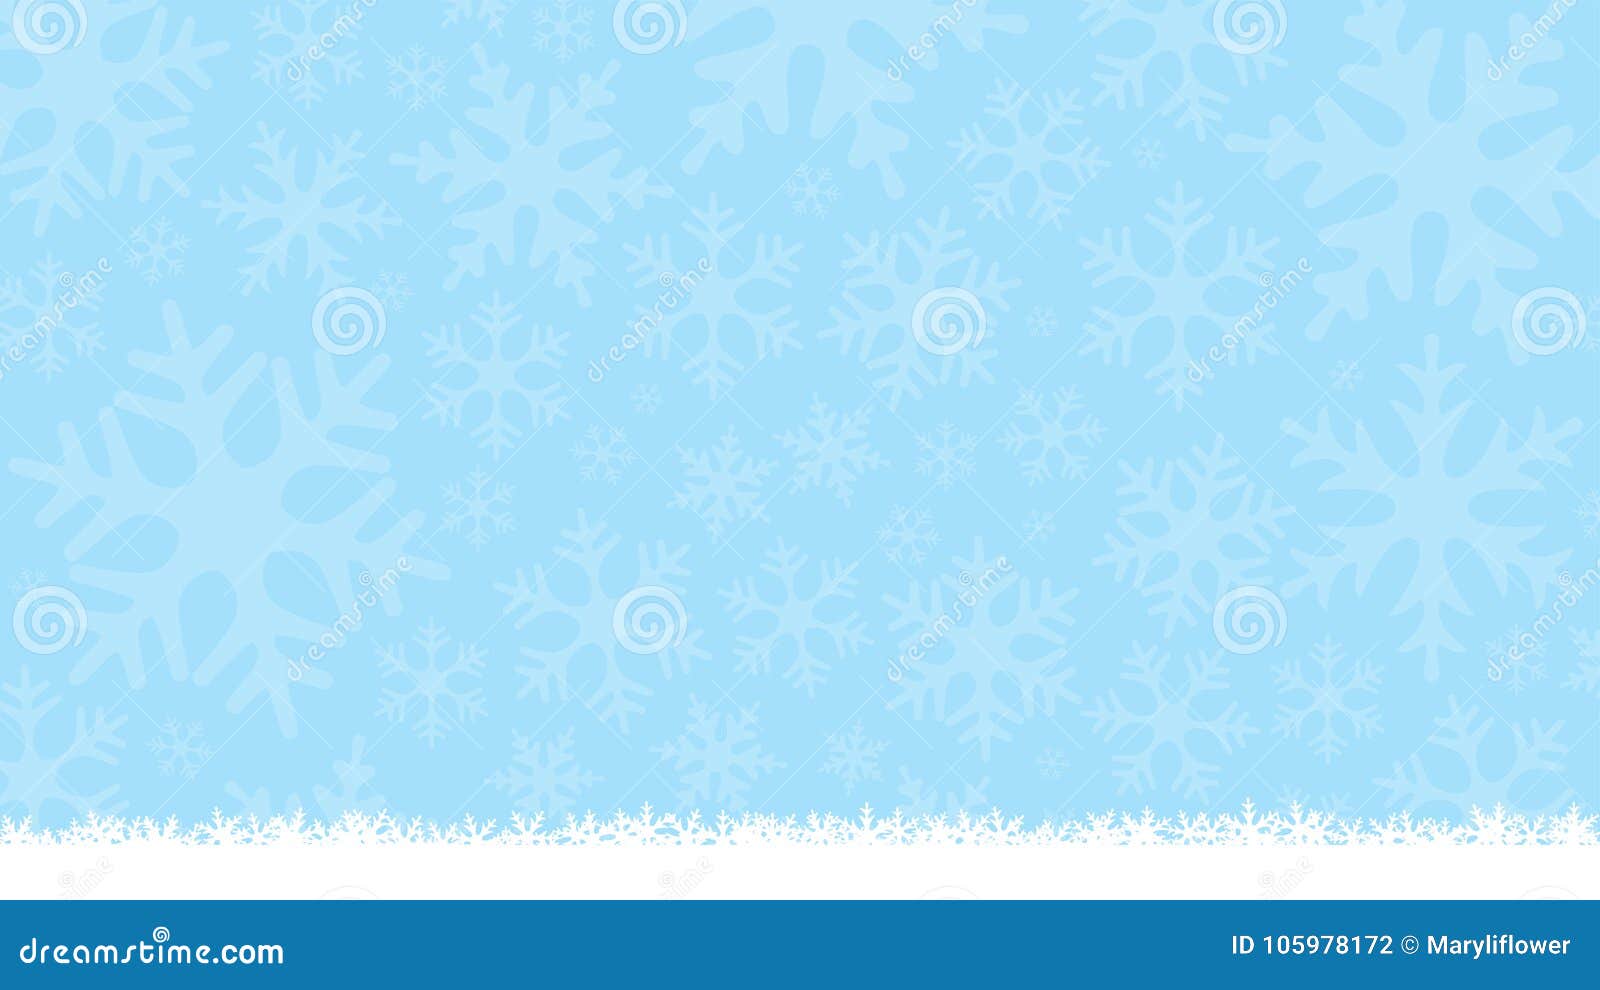 winter light blue background with snowflake silhouettes. new year and christmas soft background. greeting card, banner template. m